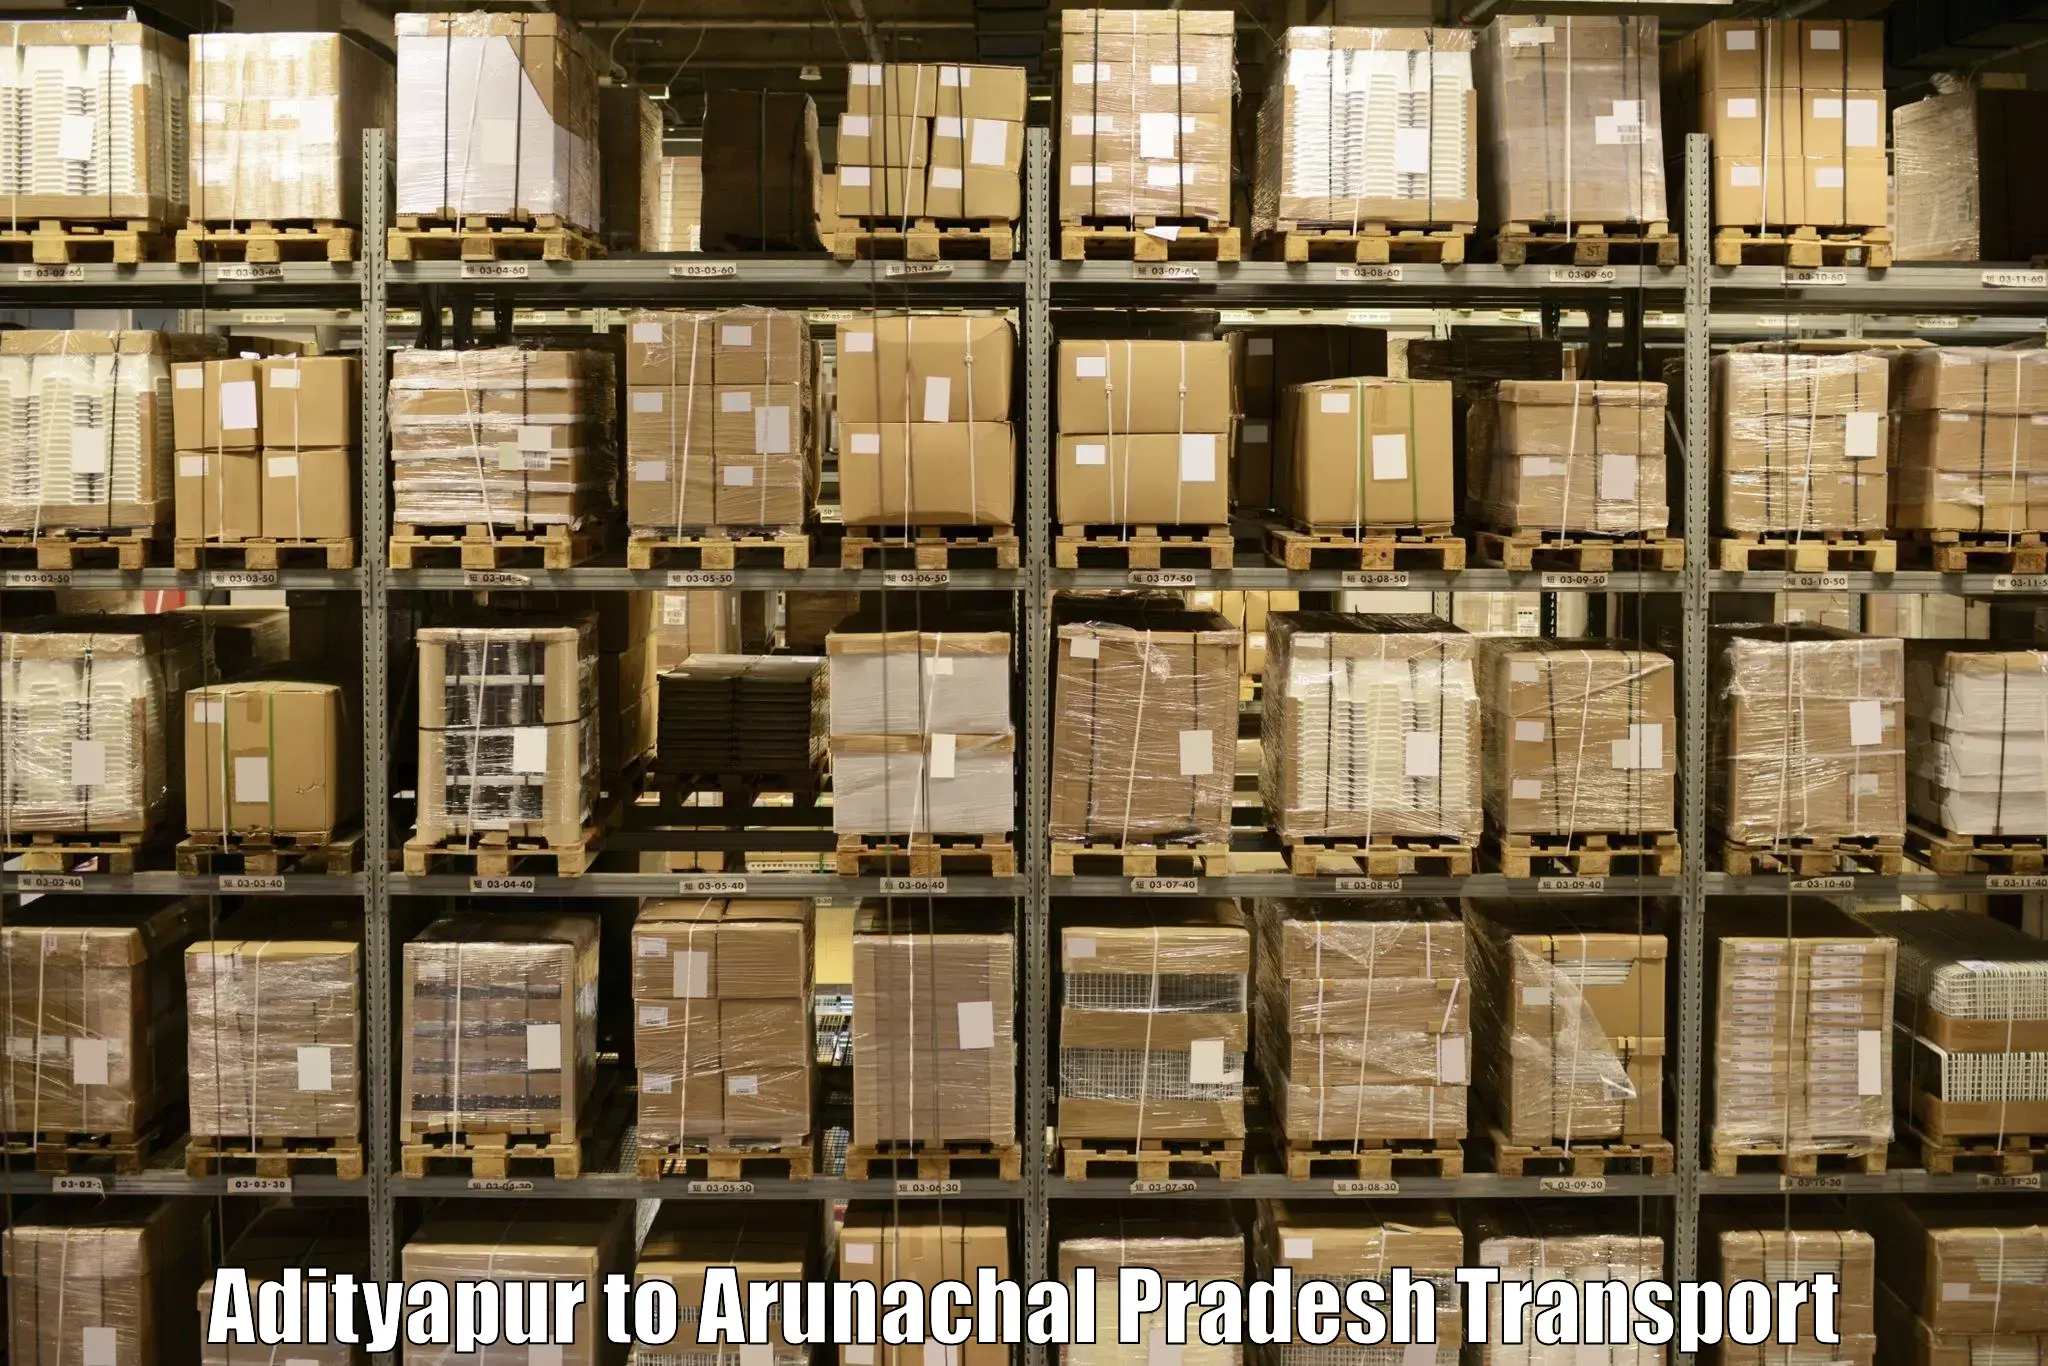 Transport bike from one state to another Adityapur to Jairampur